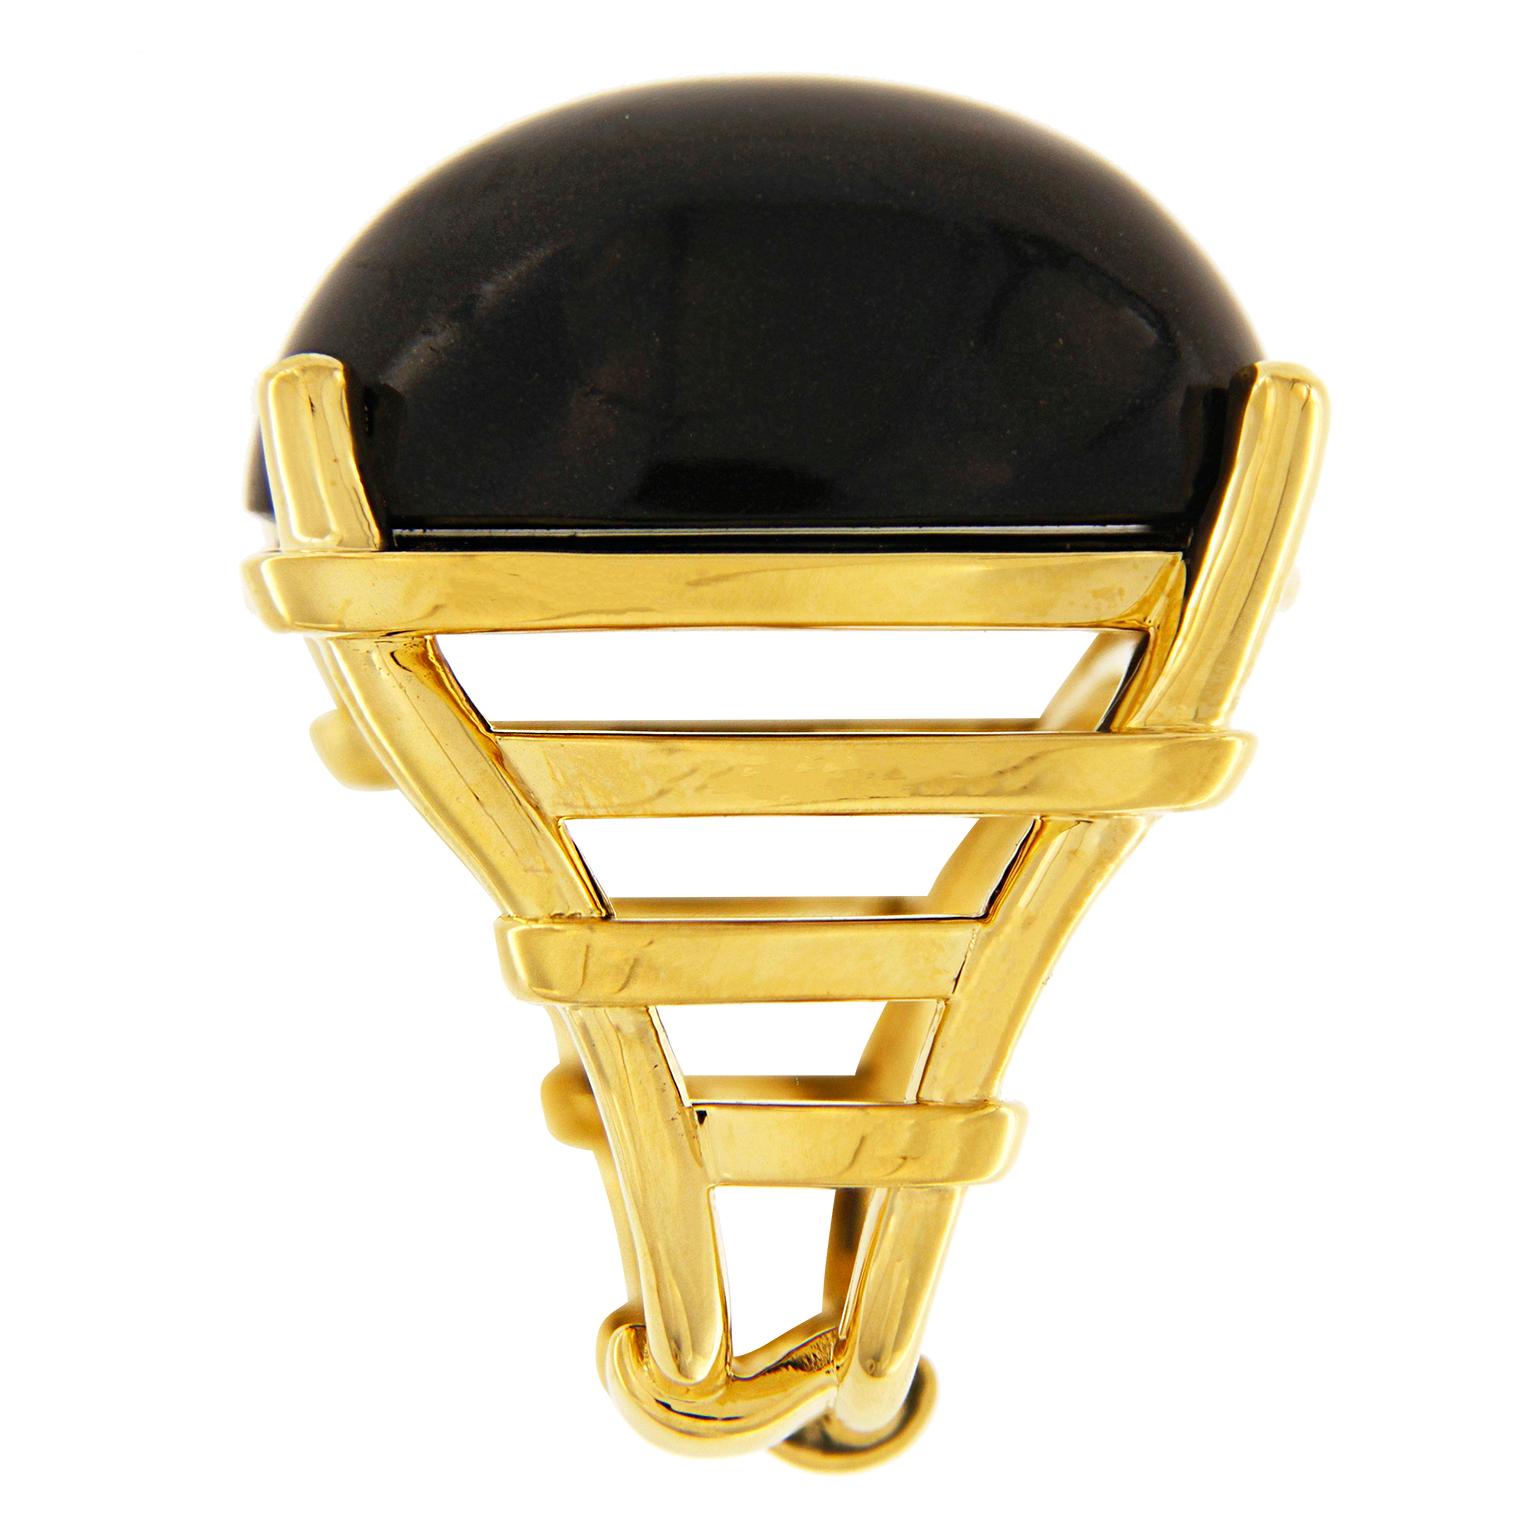 Valentin Magro Trellis Ring with Oval Black Jade Cabochon blends dark and bright. The featured stone is shaped into an oval cabochon and polished to showcase its black hue. It’s set between 18k yellow gold prongs. The band is a split shank with gold